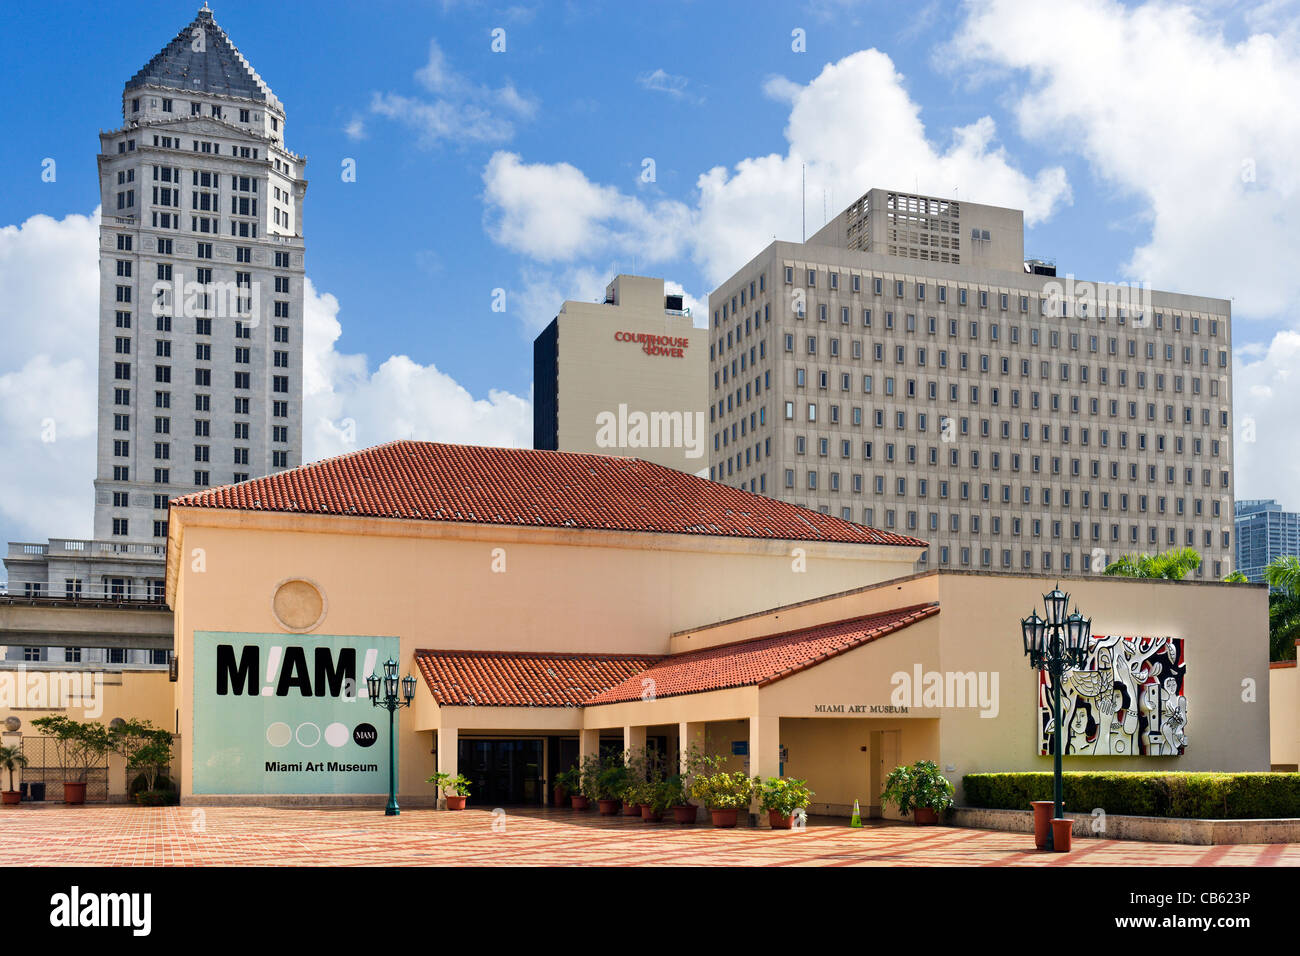 The old Miami Art Museum with the Miami-Dade County Courthouse tower behind, West Flagler Street, Miami, Florida, USA Stock Photo